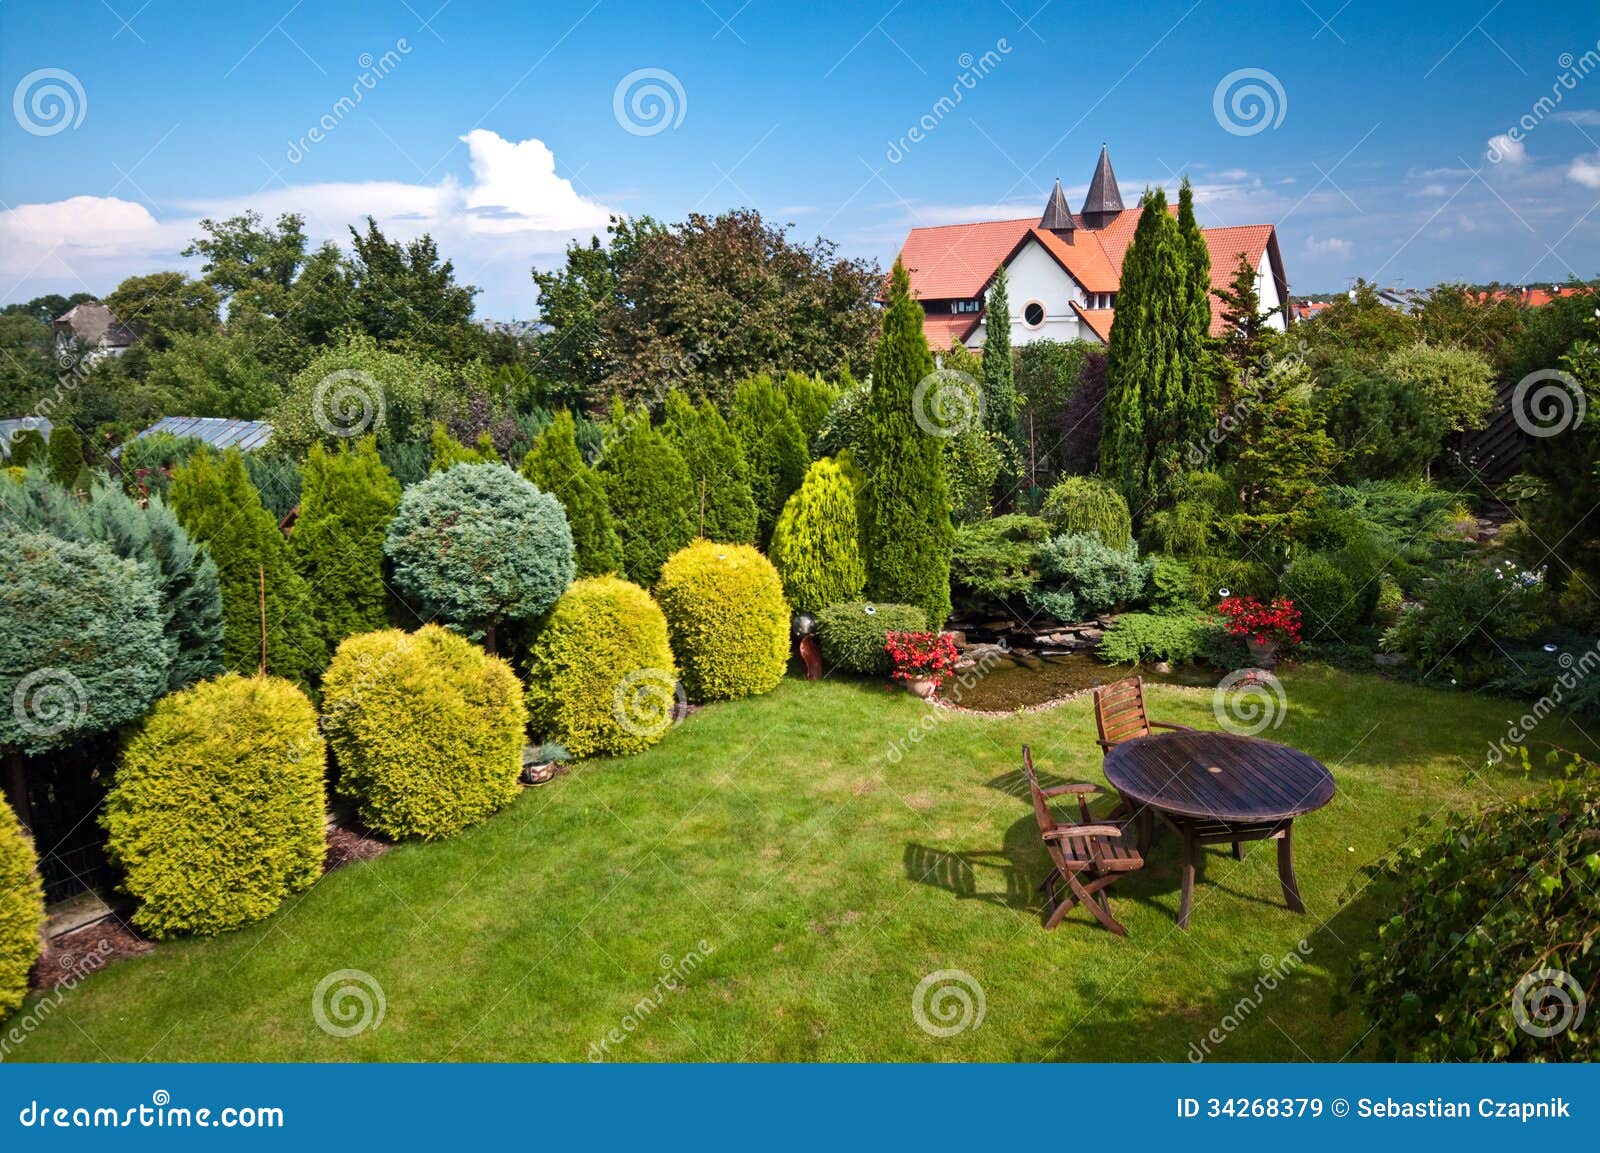 house and landscaped gardens